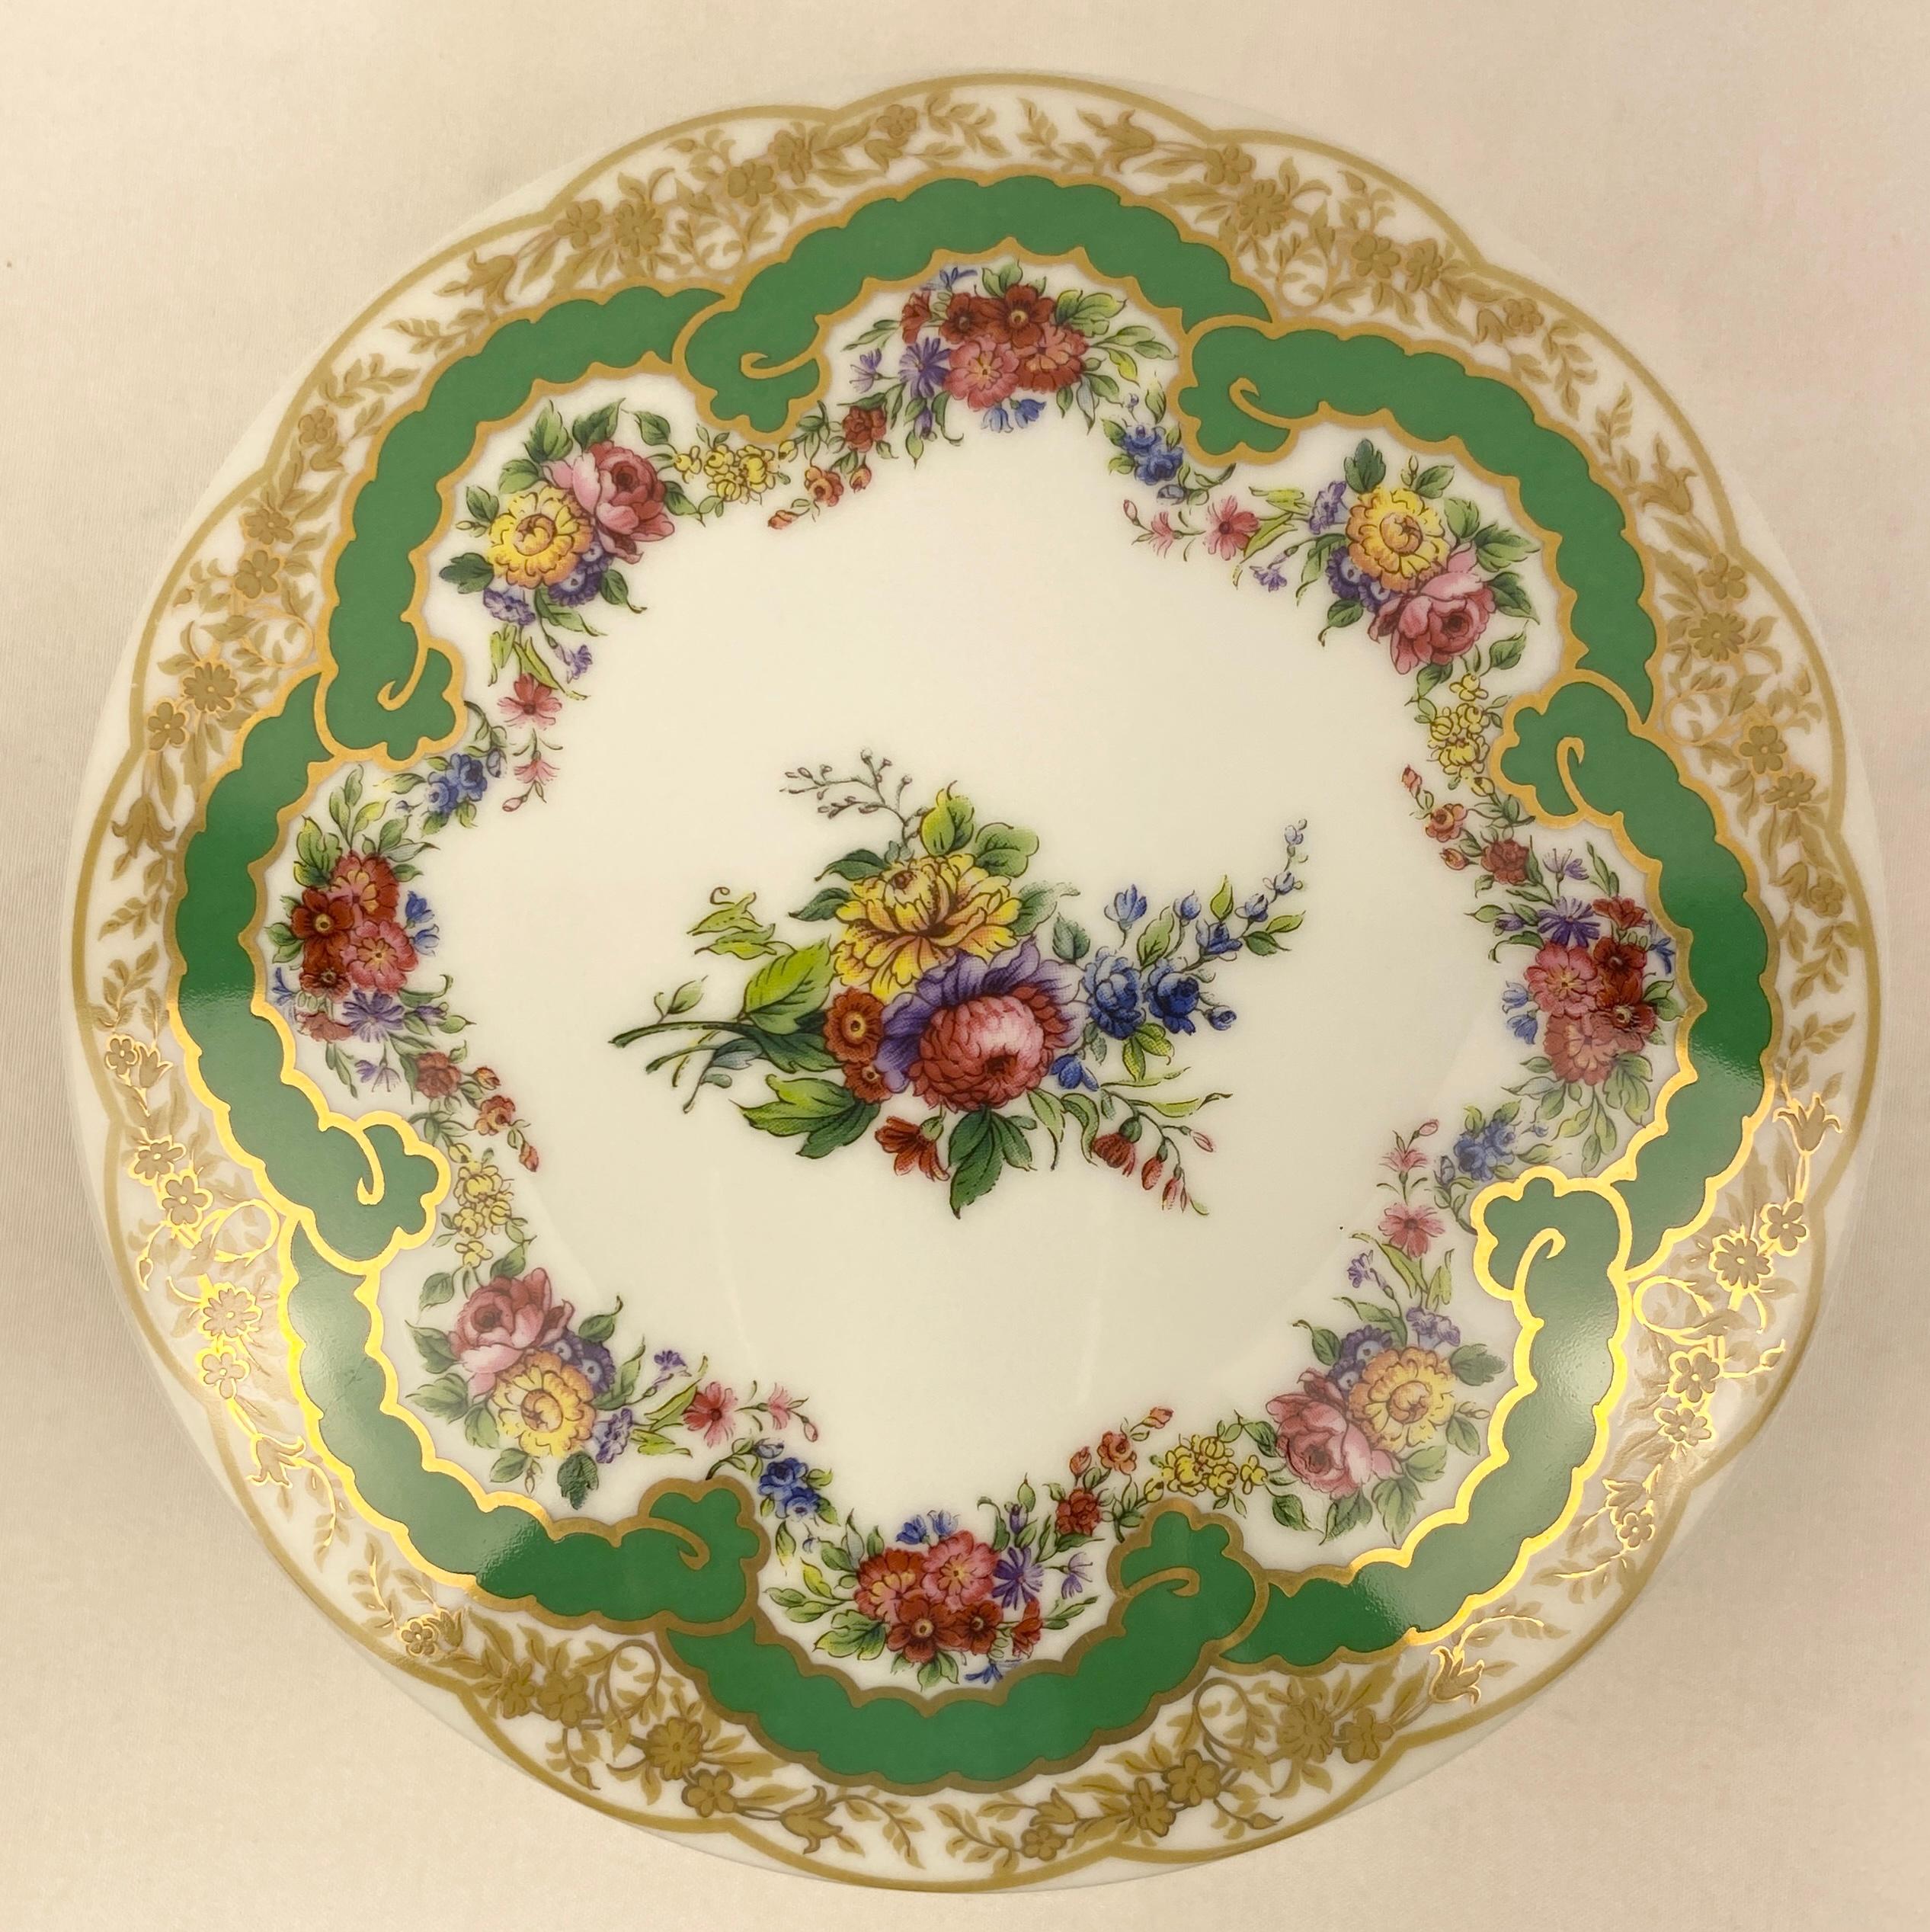 A fine quality porcelain lidded candy dish or jewelry box inspired in the manner of 19th Century Sevres designs.

This fine quality and beautiful porcelain lidded candy dish or jewelry box is hand-crafted and hand-painted using the finest quality